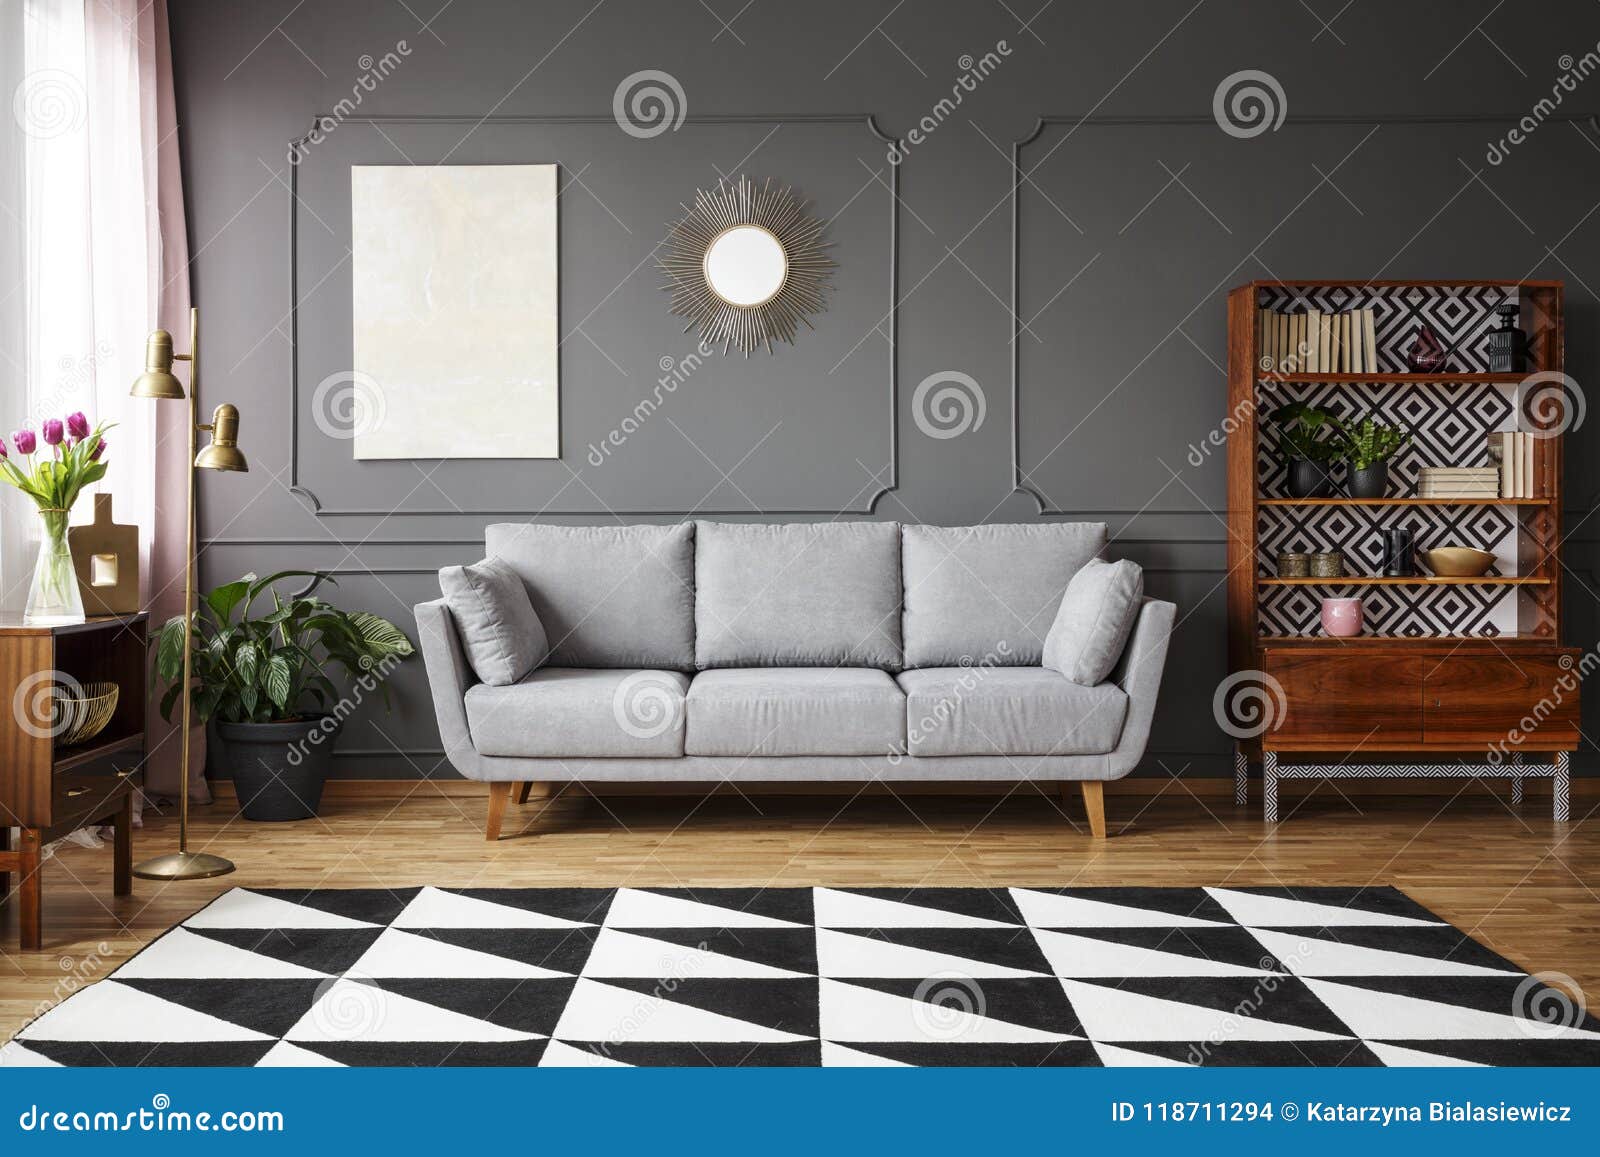 Black and White Carpet with Geometric Pattern Placed on the Floor in Dark Living  Room Interior with Grey Couch, Vintage Cupboard Stock Photo - Image of  cupboard, lamp: 118711294